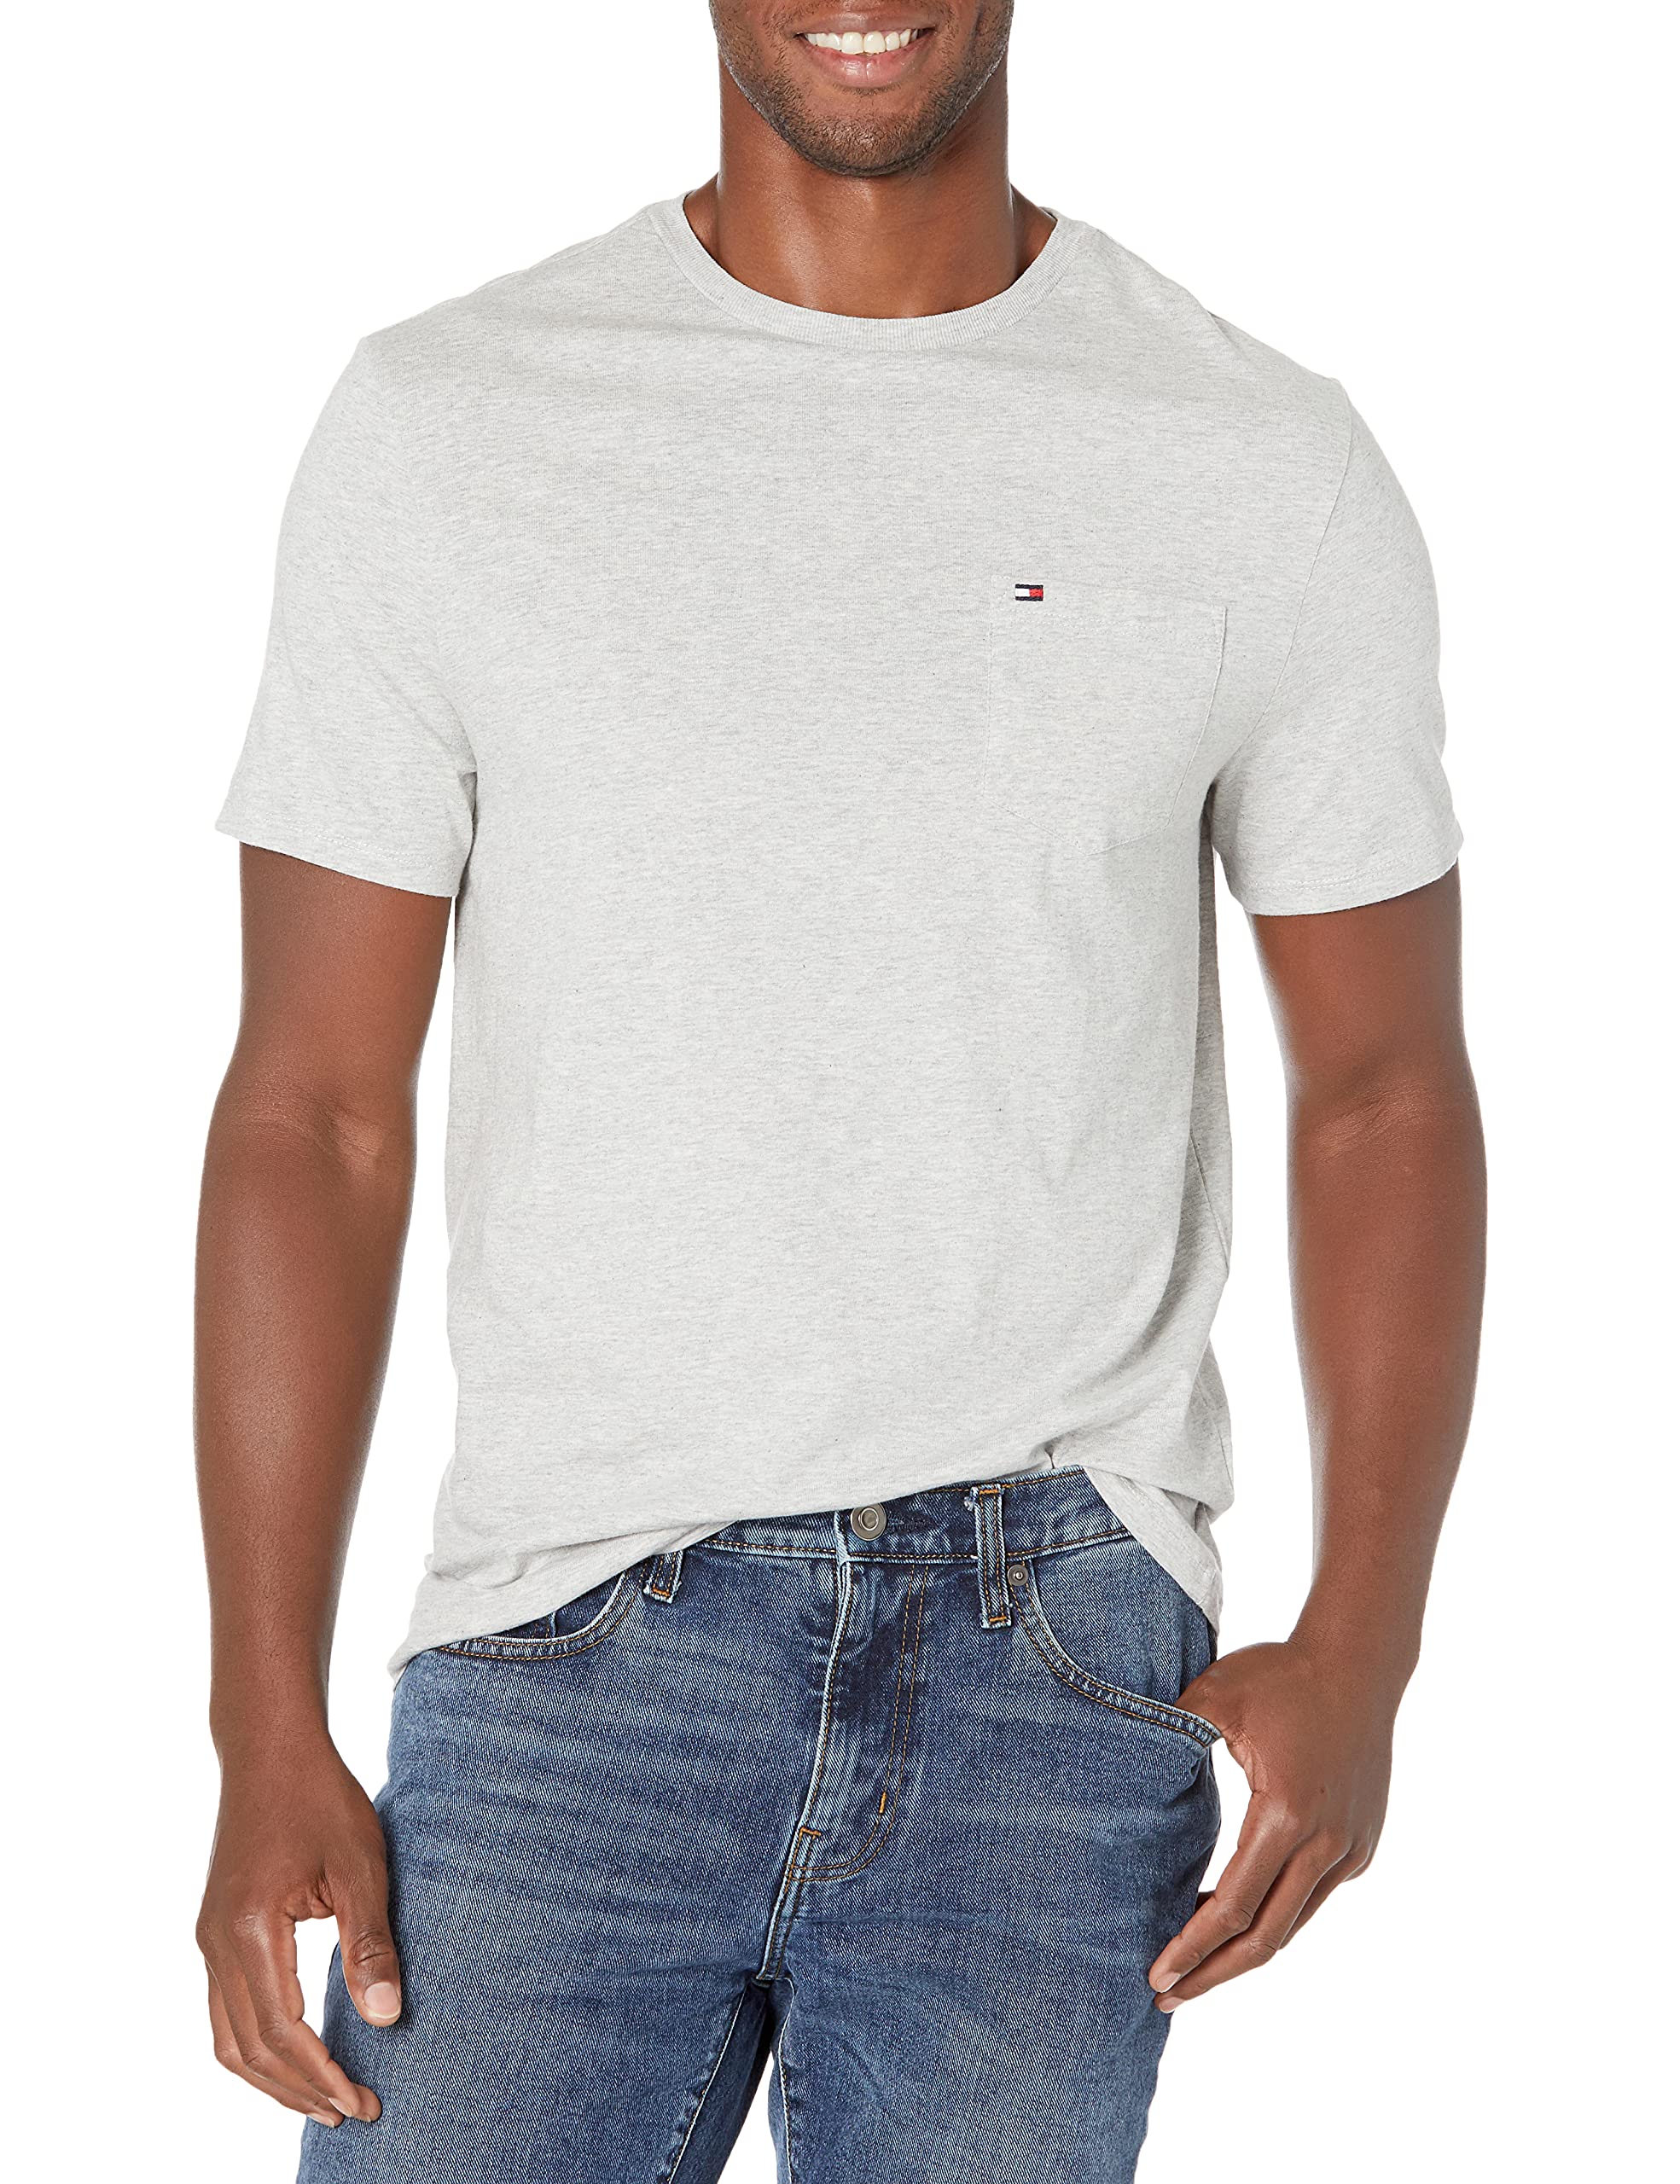 Tommy Hilfiger Men's 100% Cotton Short Sleeve Crewneck T-Shirt with Pocket (Grey Heather, X-Small-3X-Large)) $13.98 + Free Shipping w/ Prime or on $35+